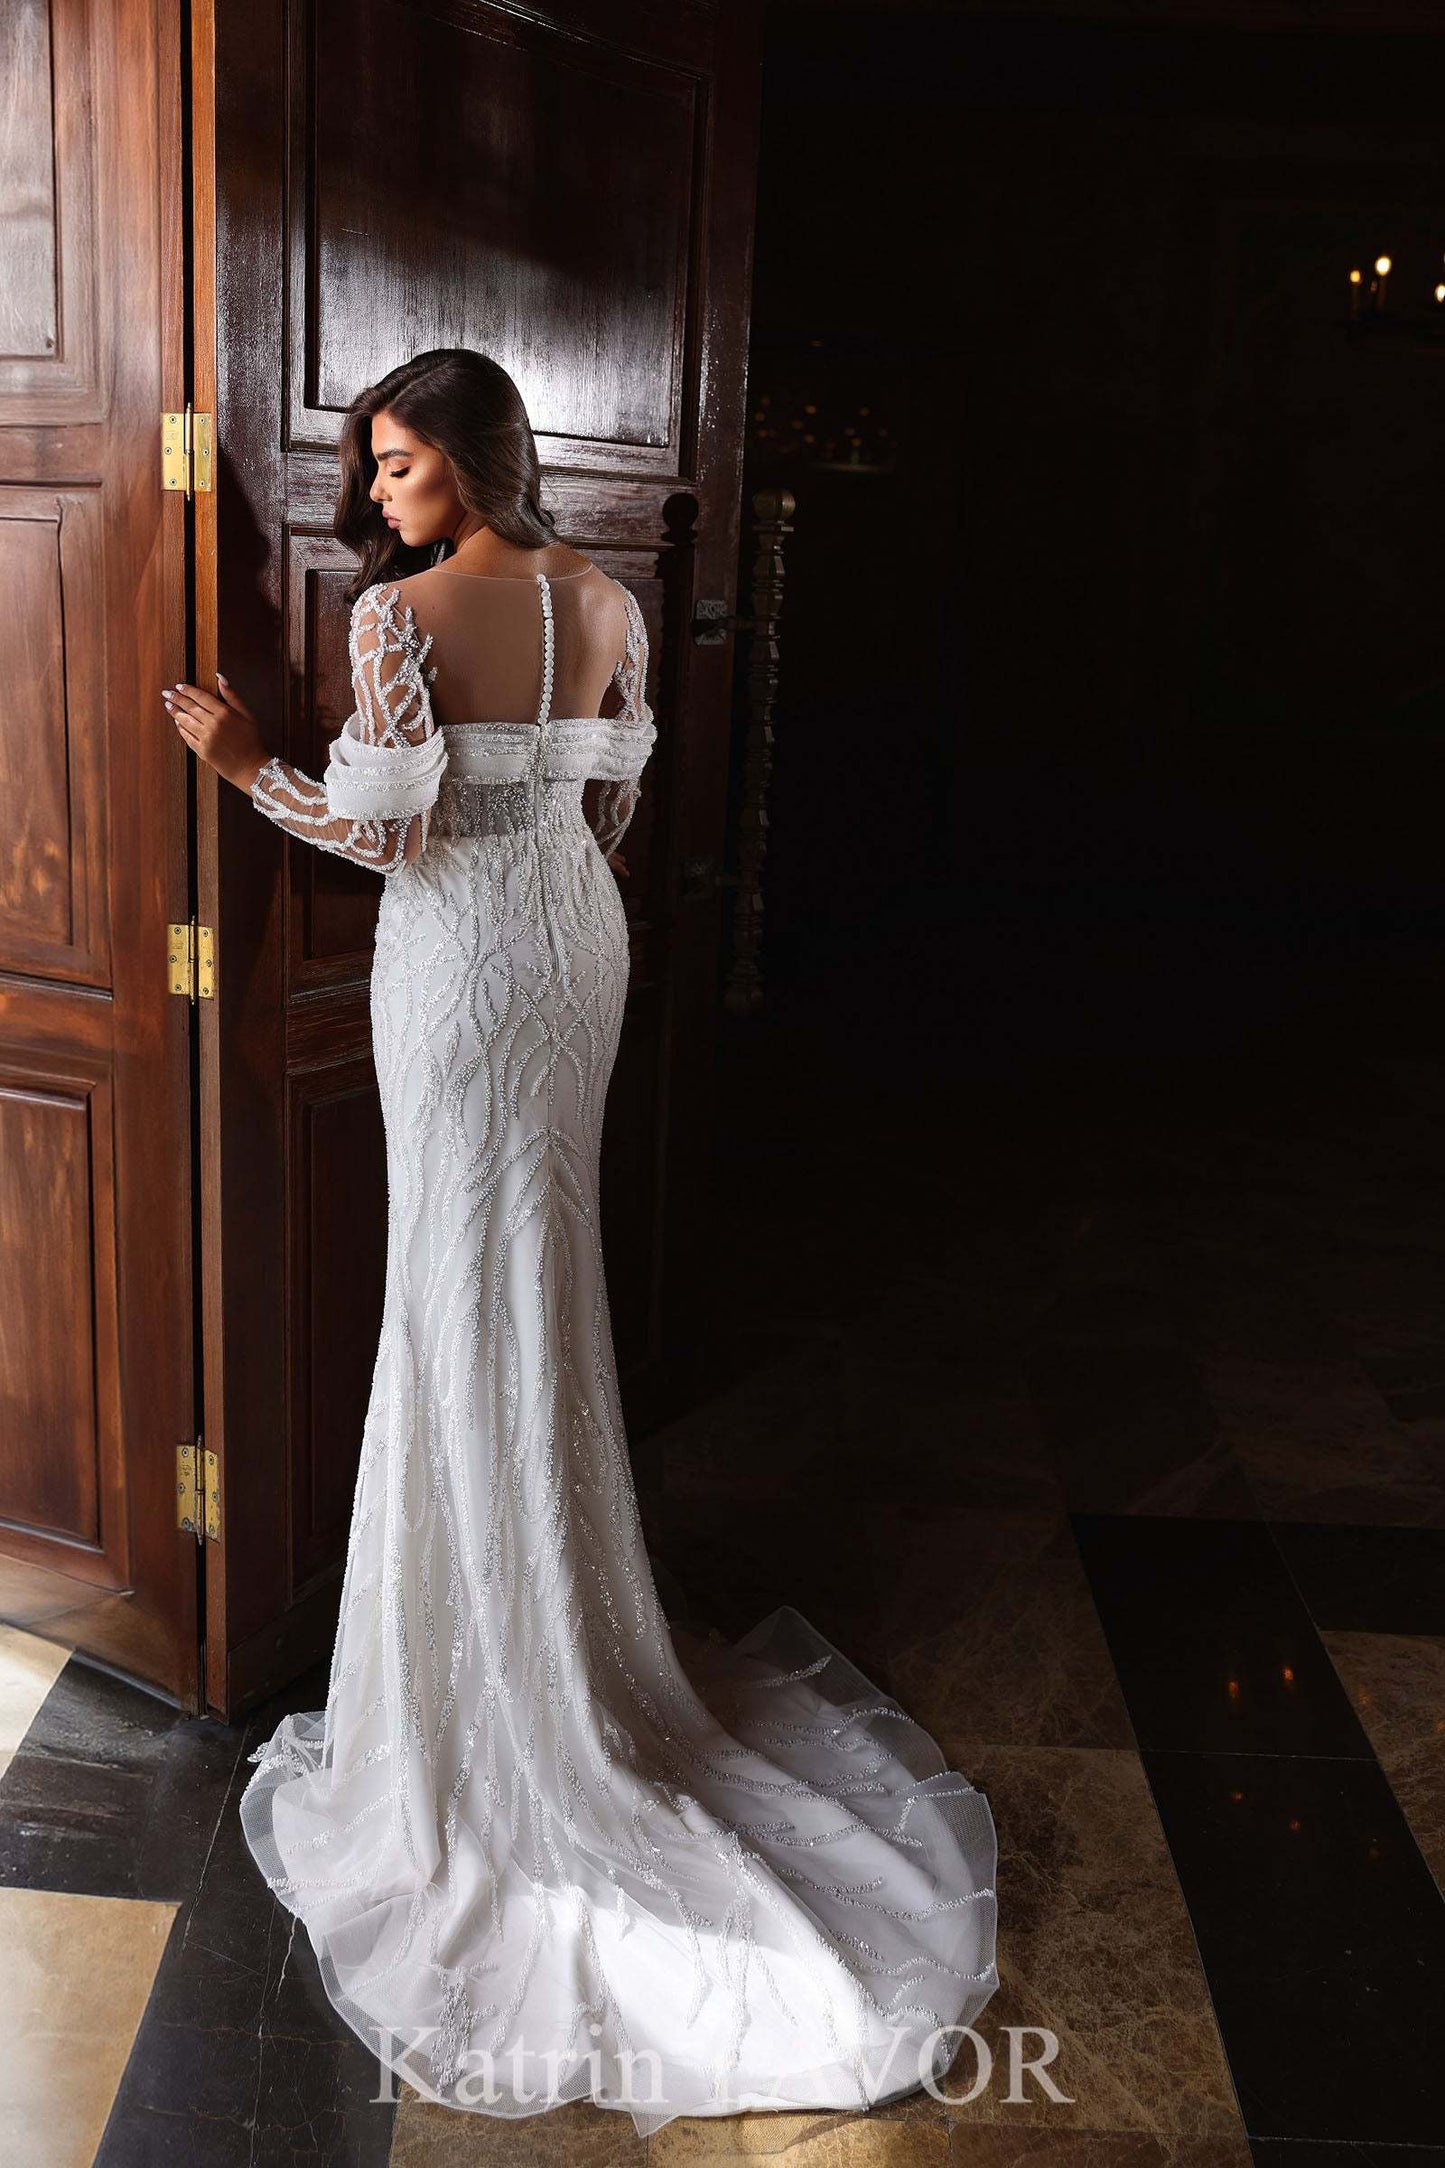 KatrinFAVORboutique-Long sleeve mermaid wedding gown embroidered bridal dress